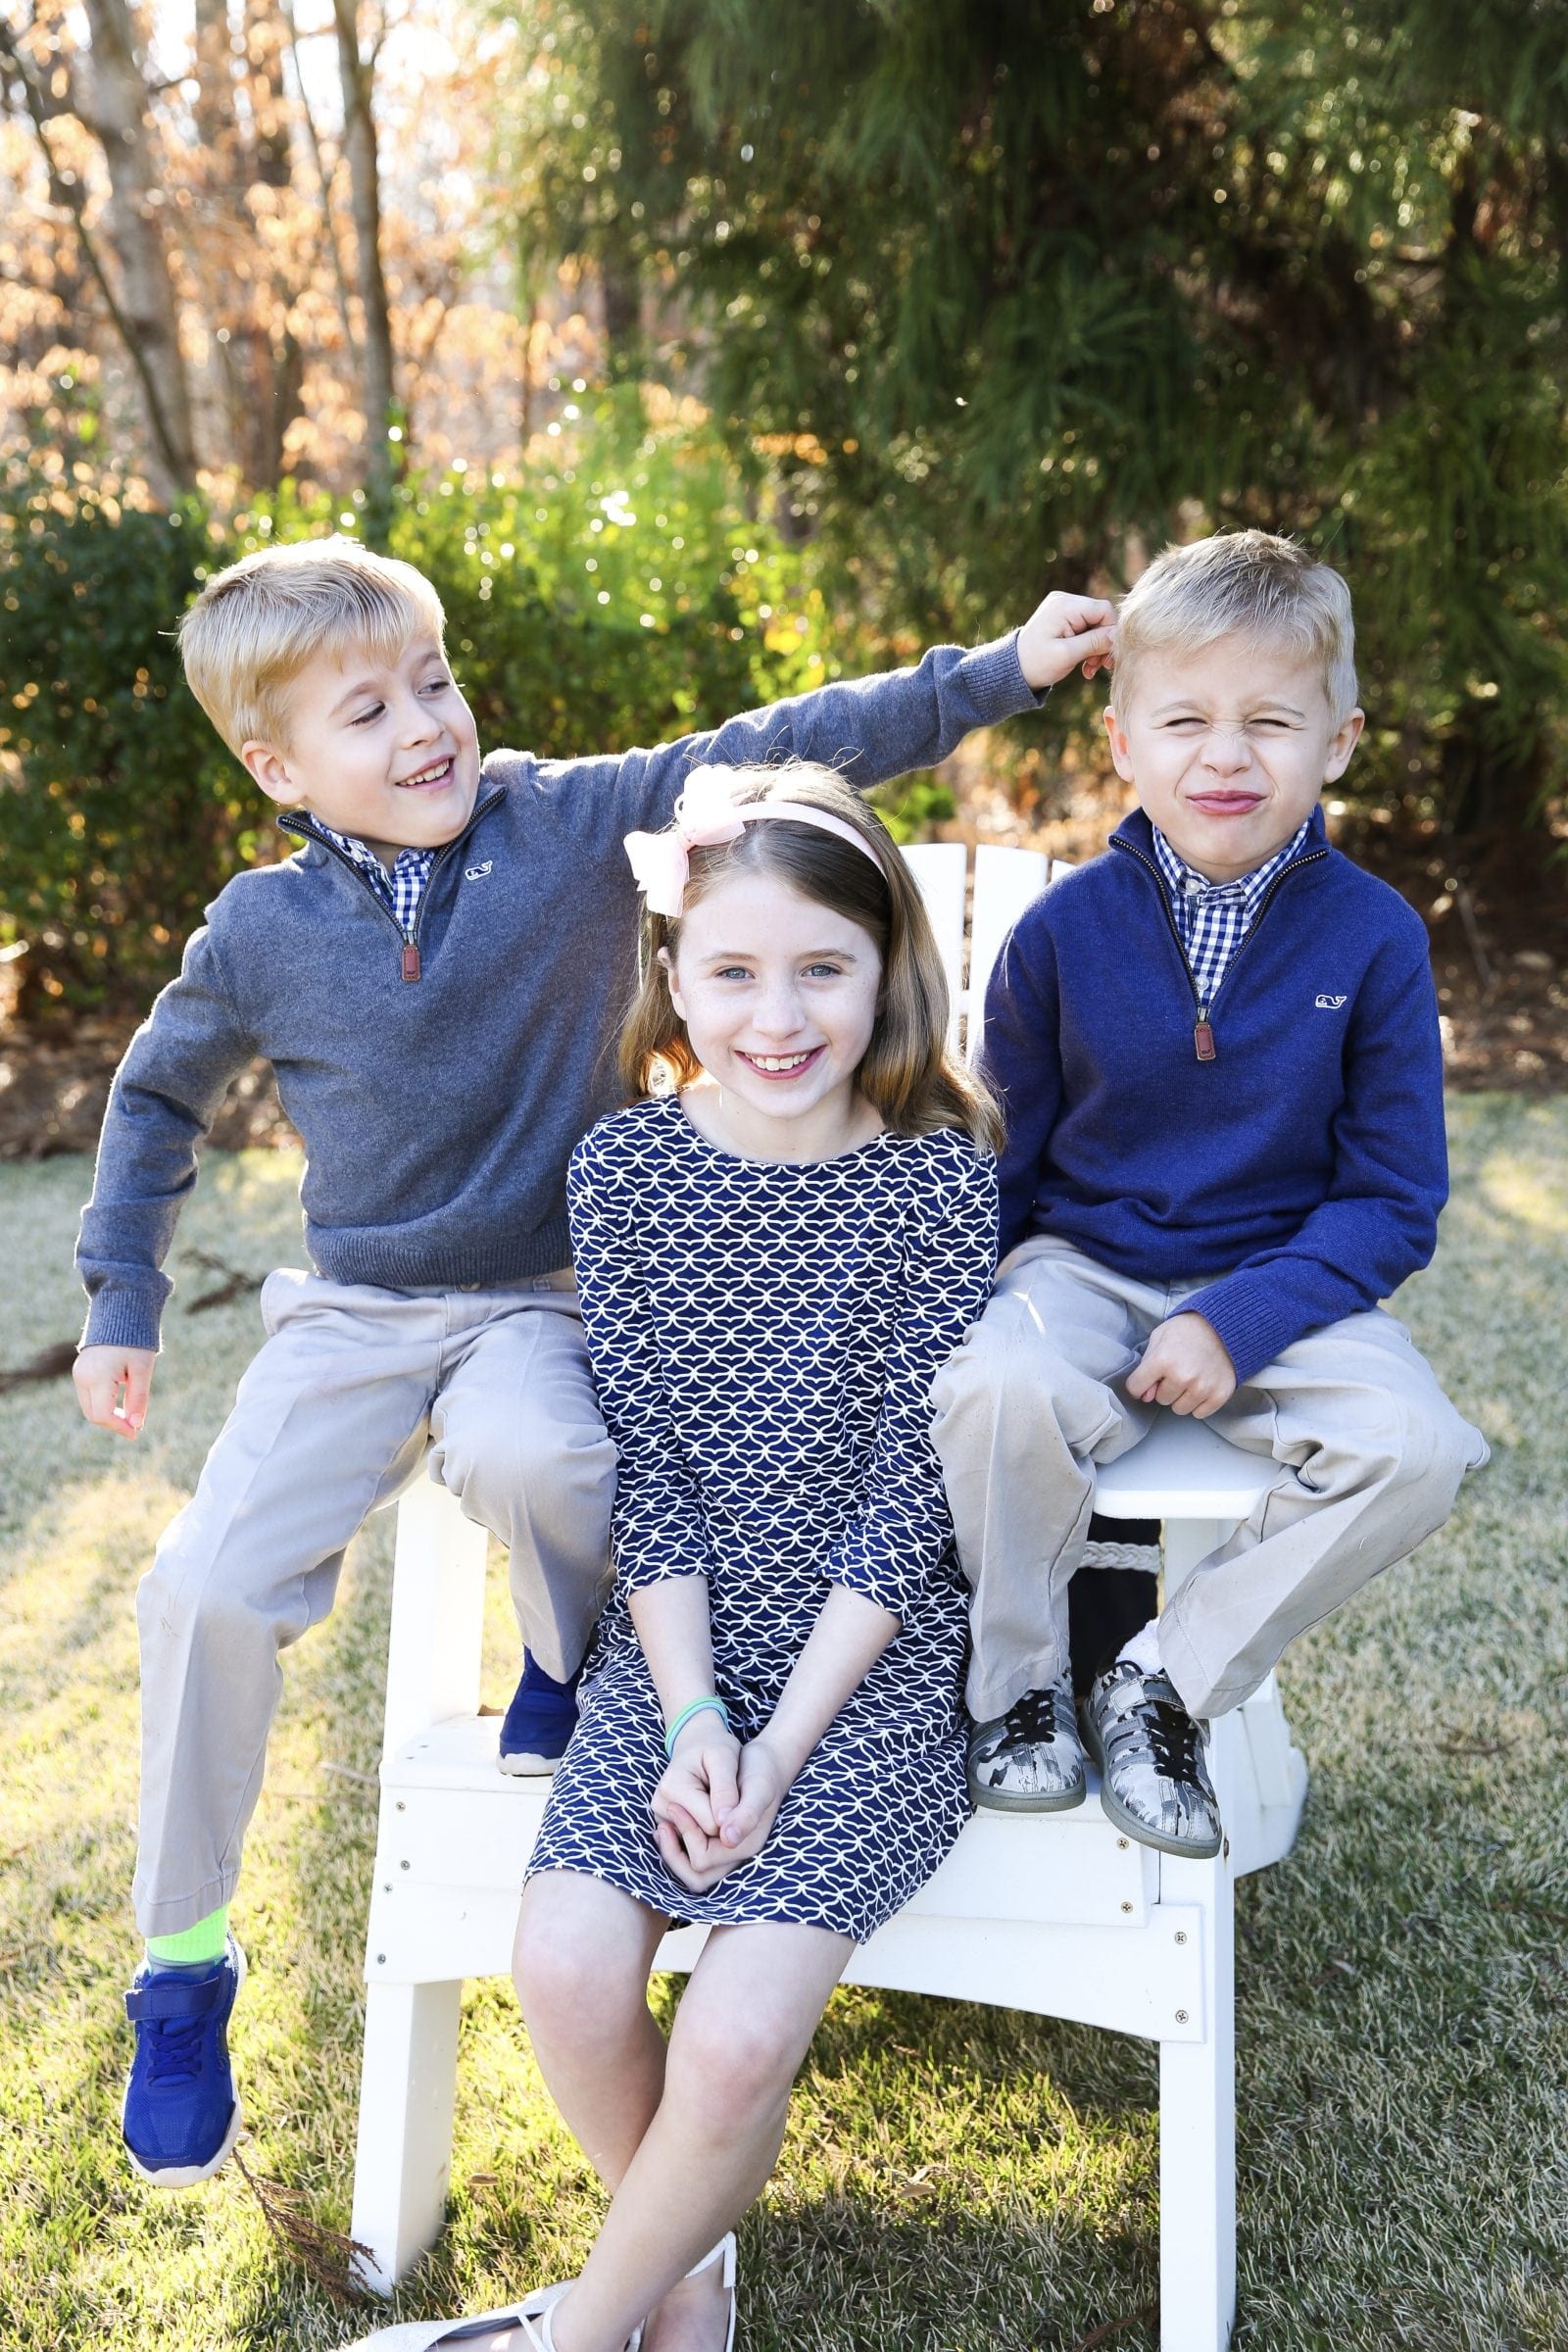 Vineyard Vines Clothes for Kids My Sweet Three and their Southern Charm